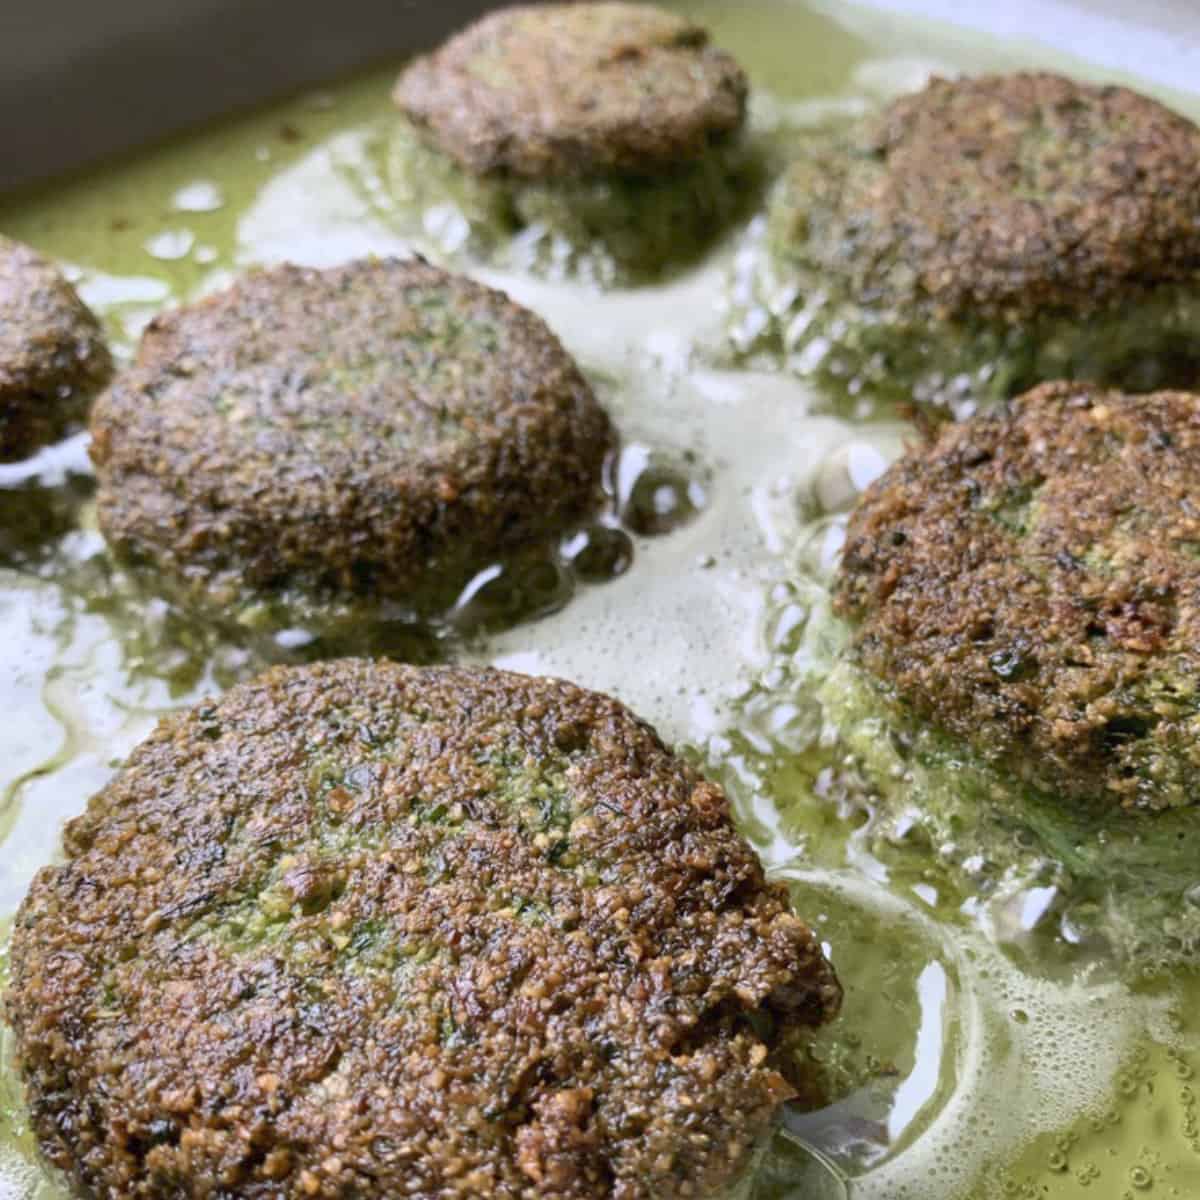 Tantalizing Taameya or Falafel – Authentic Chickpea Patties